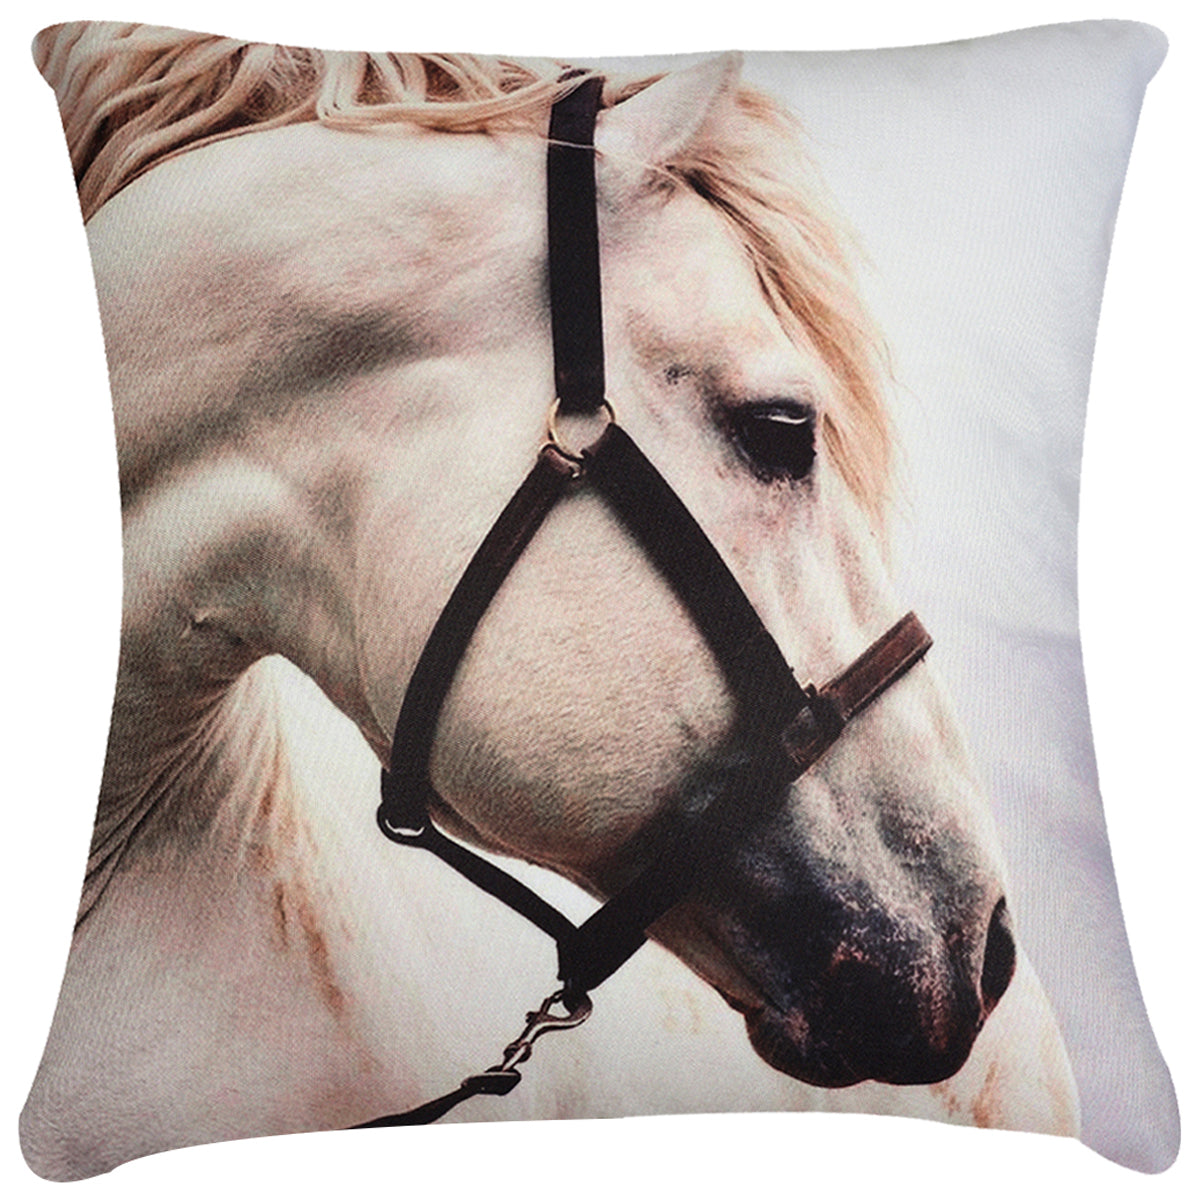 Horse Printed Throw Pillow Cover - Set of 4, 18 x 18 Inches - Decozen